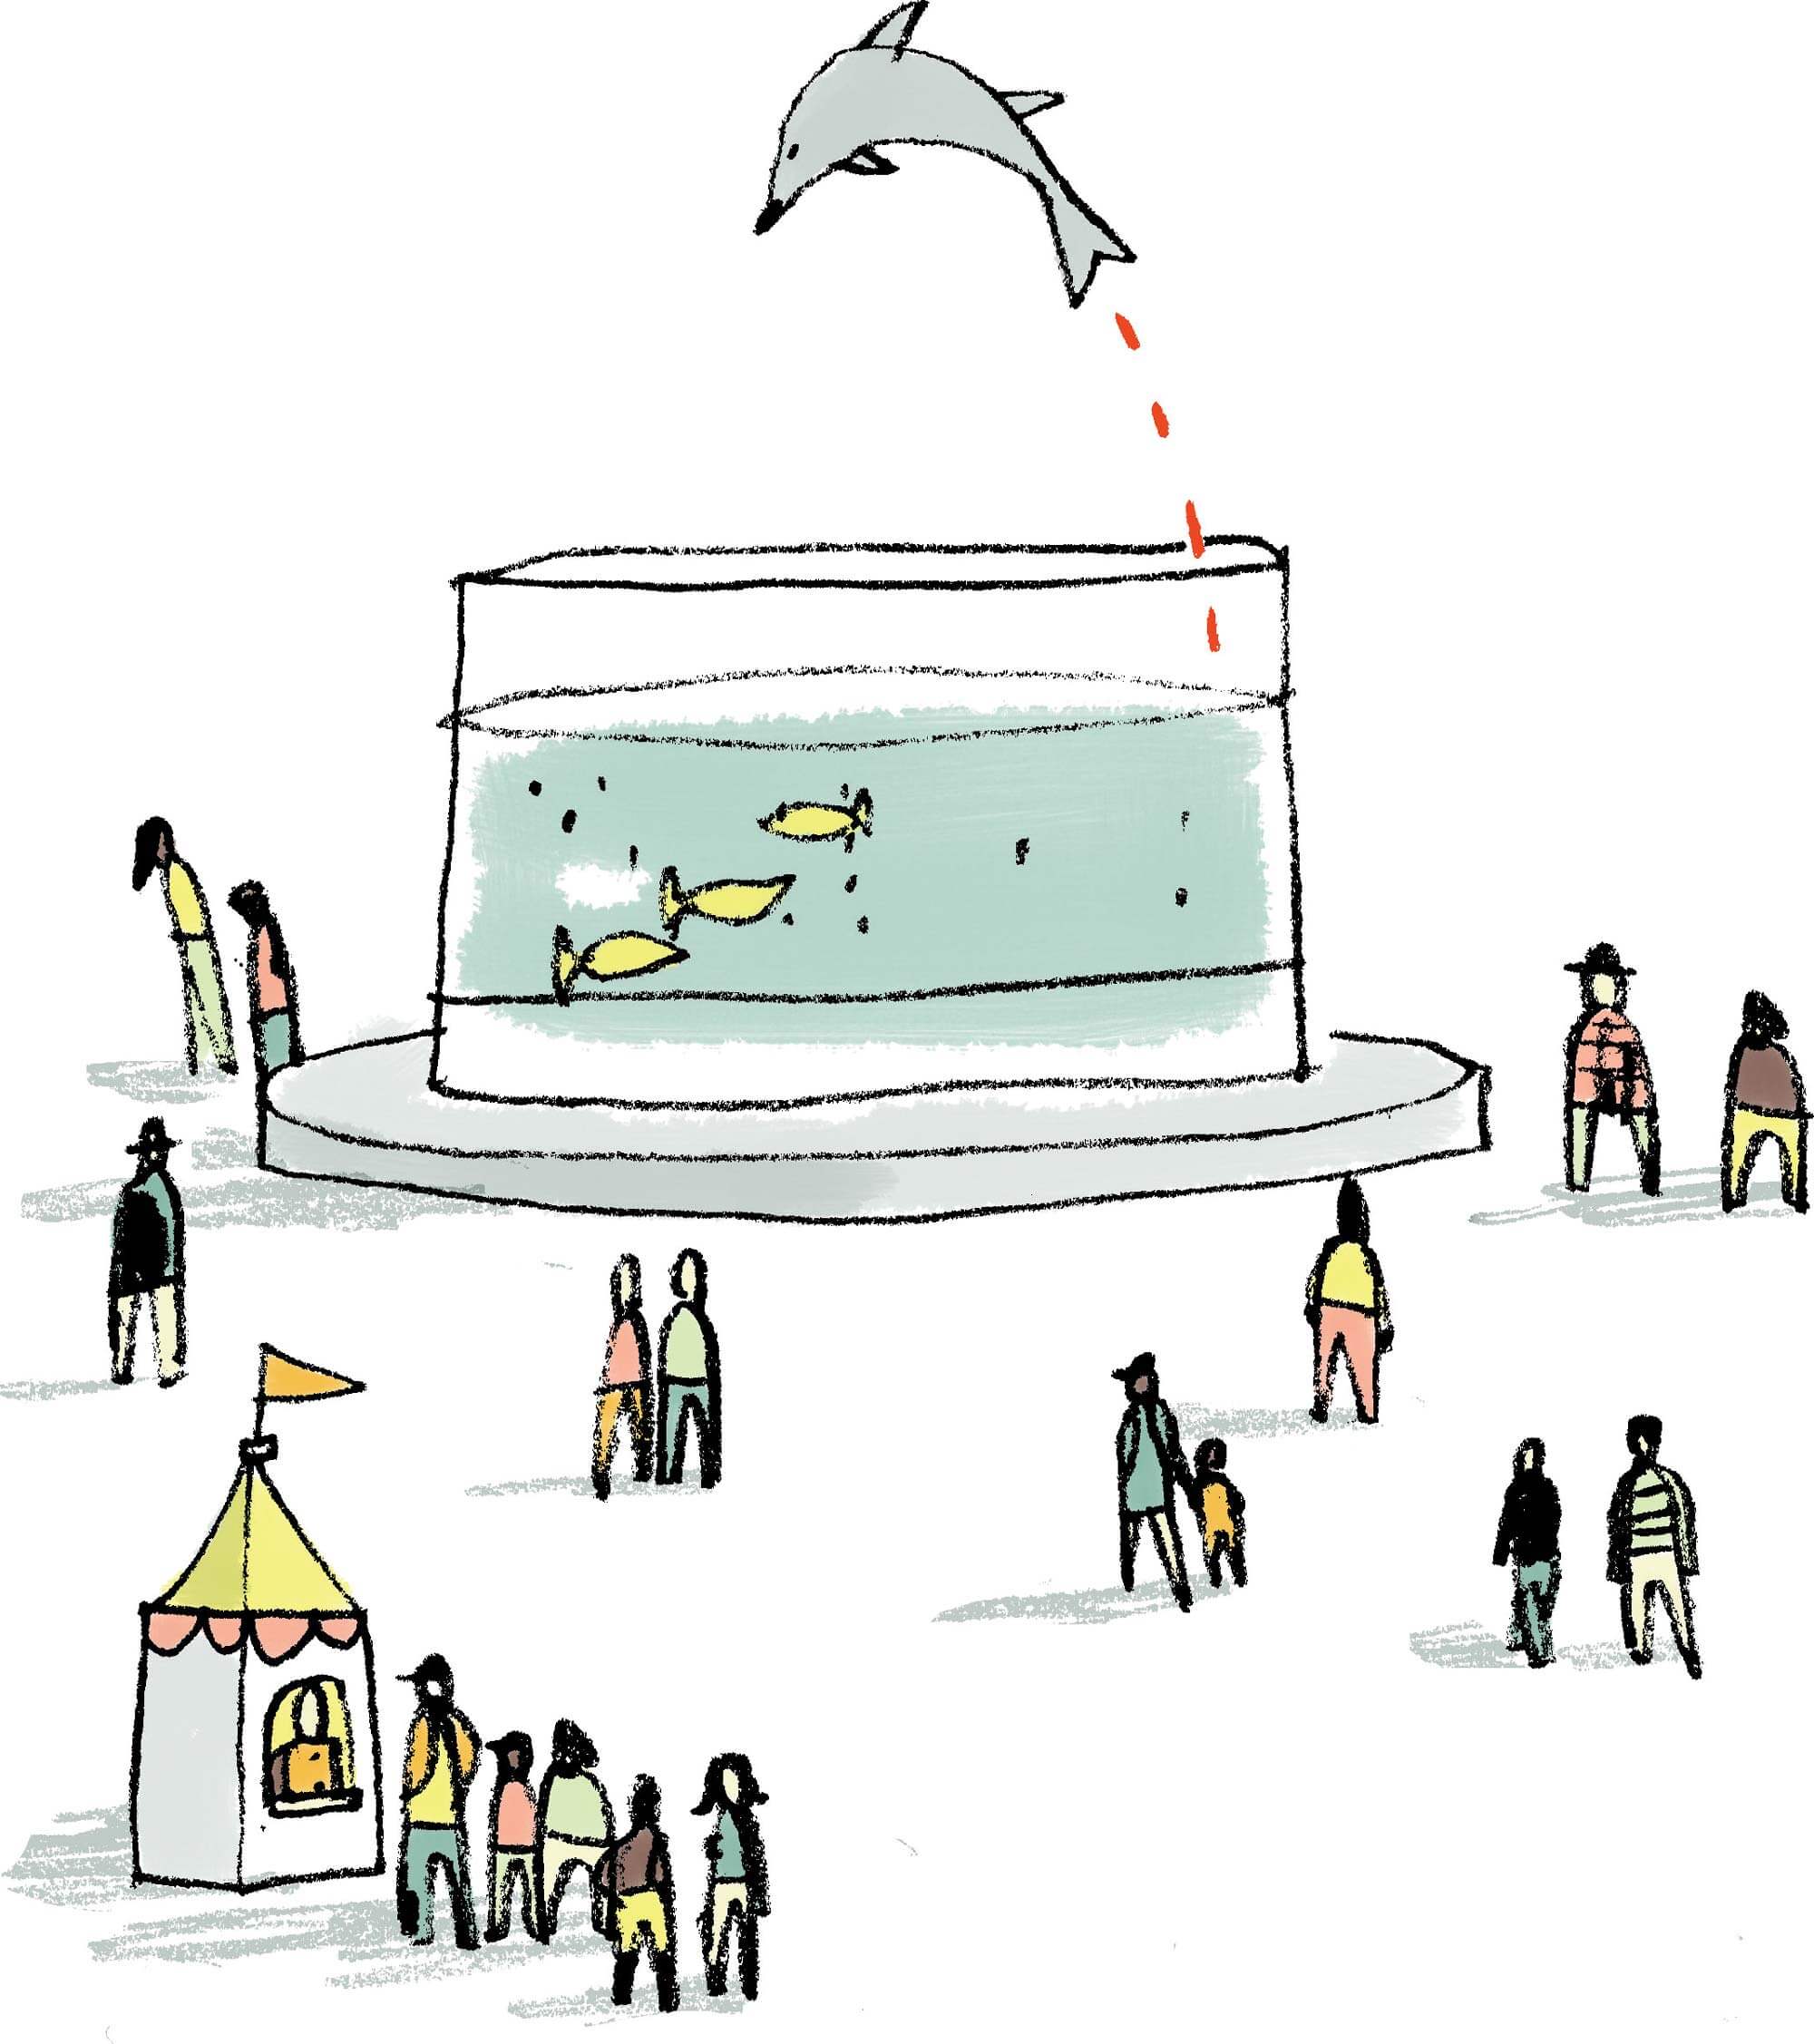 A dolphin hopping into the air from its tank, with people walking around the tank.